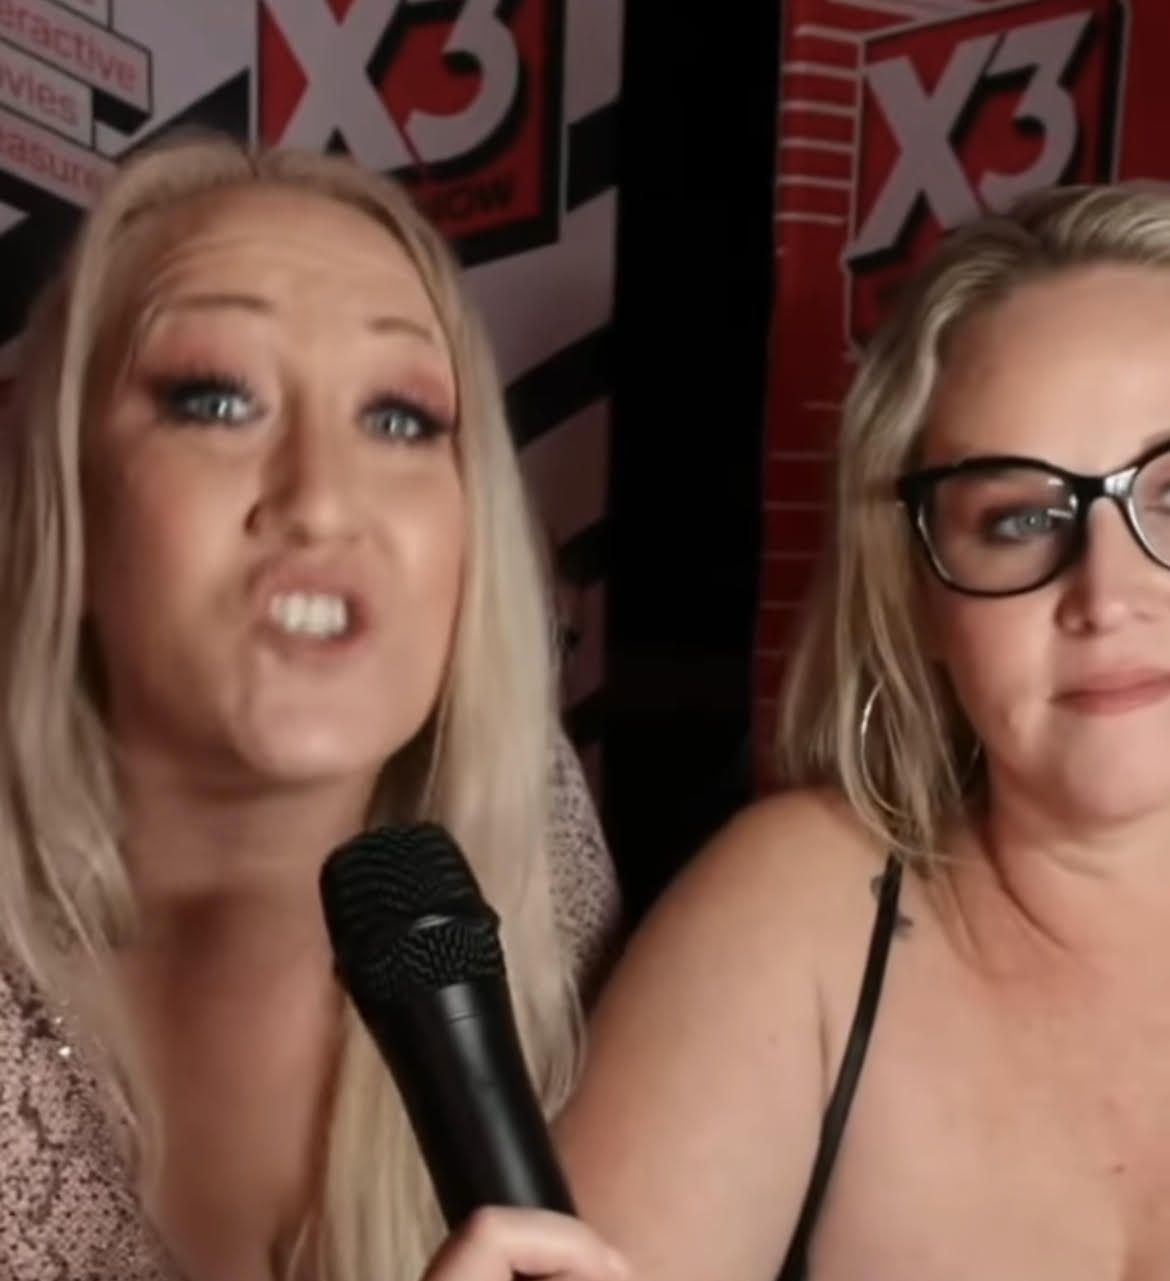 By Request: Alana Evans/Dee Siren interview at X3